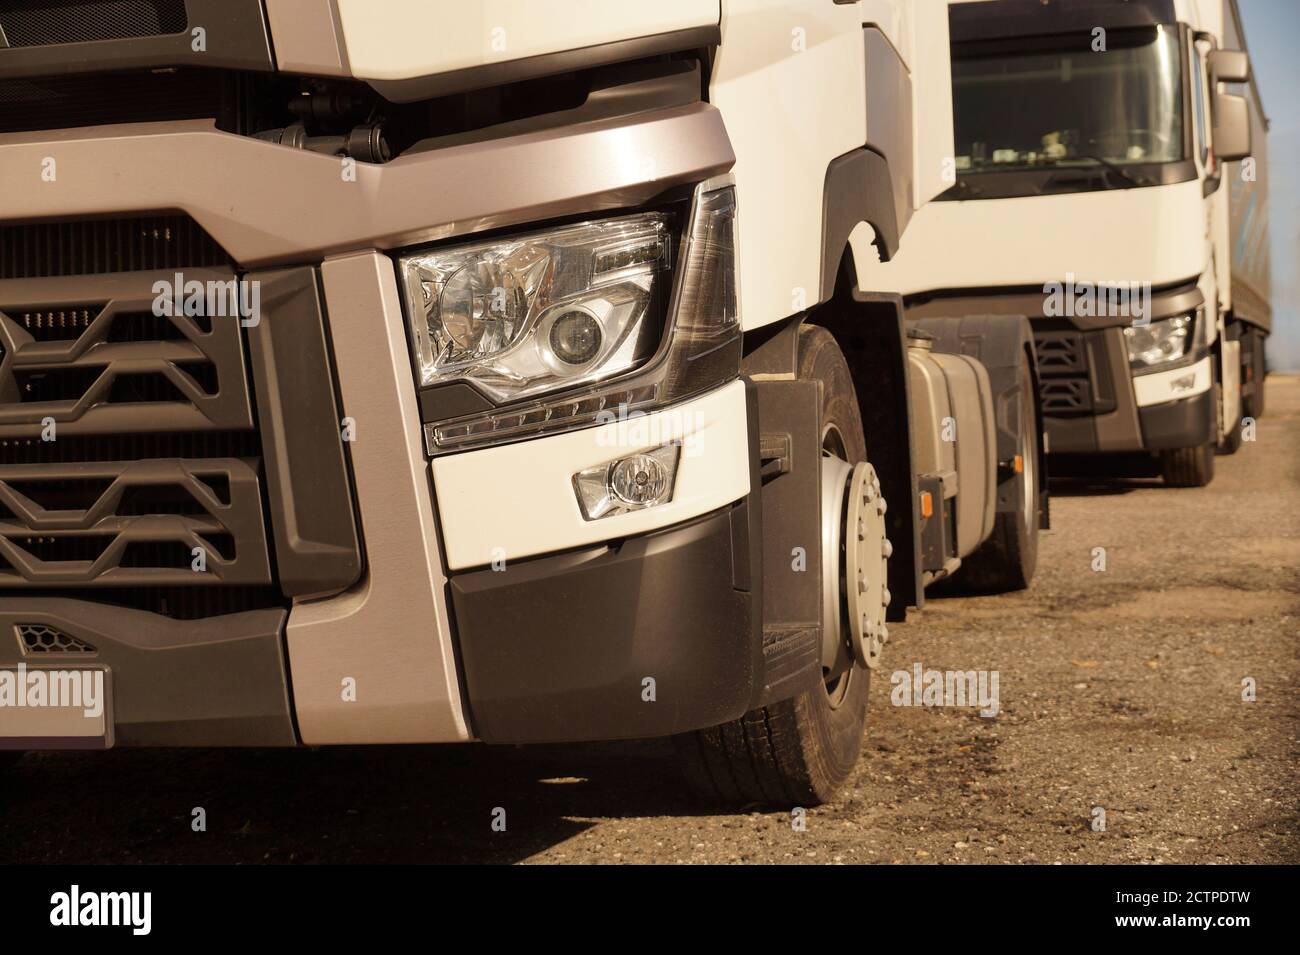 ront view of 18 wheeled trucks in the background of the second truck. Stock Photo